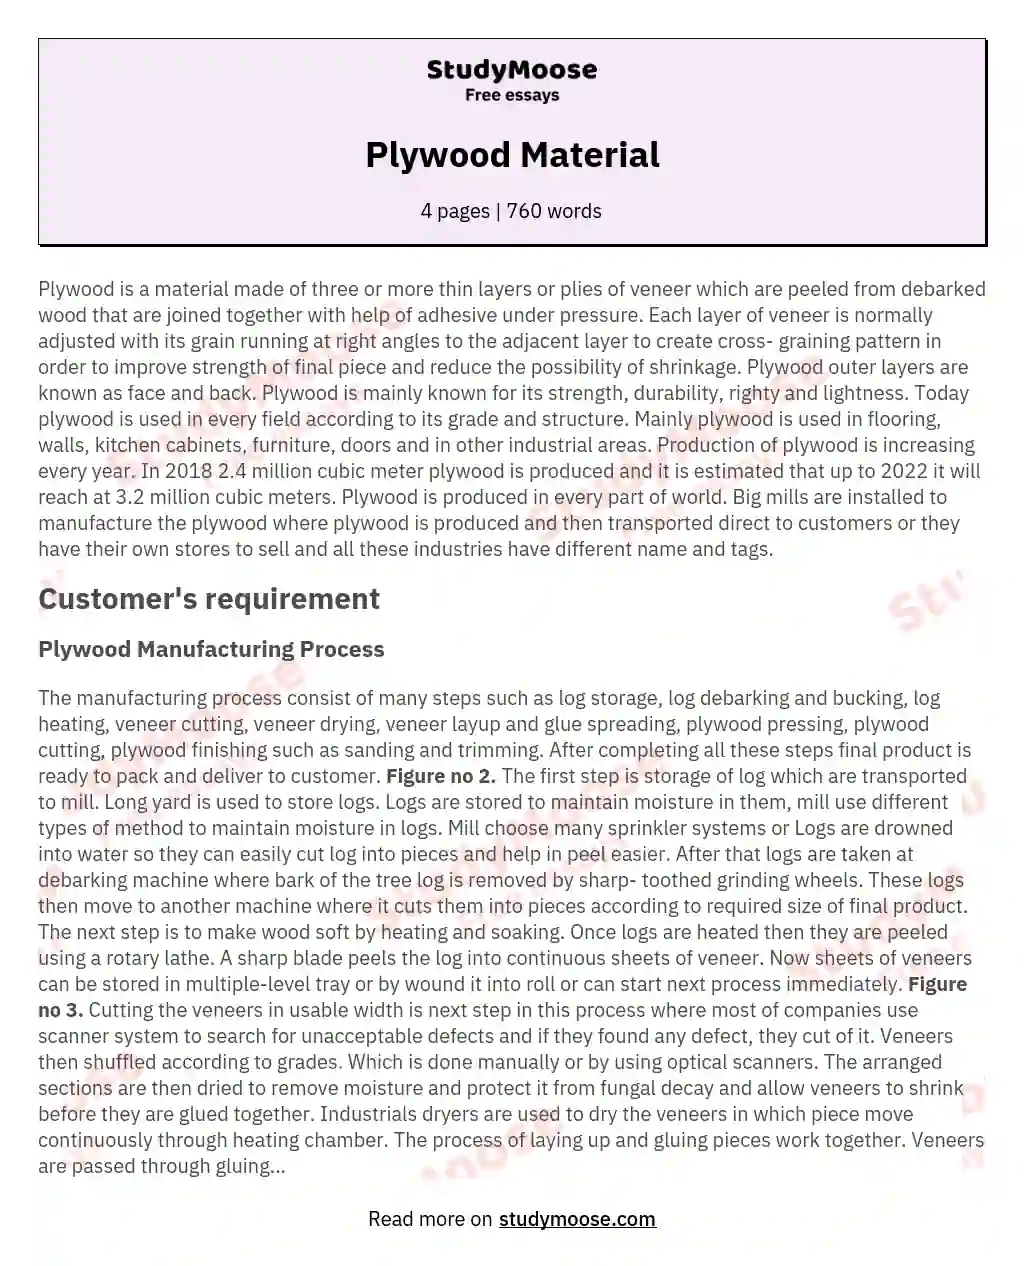 Plywood Material essay